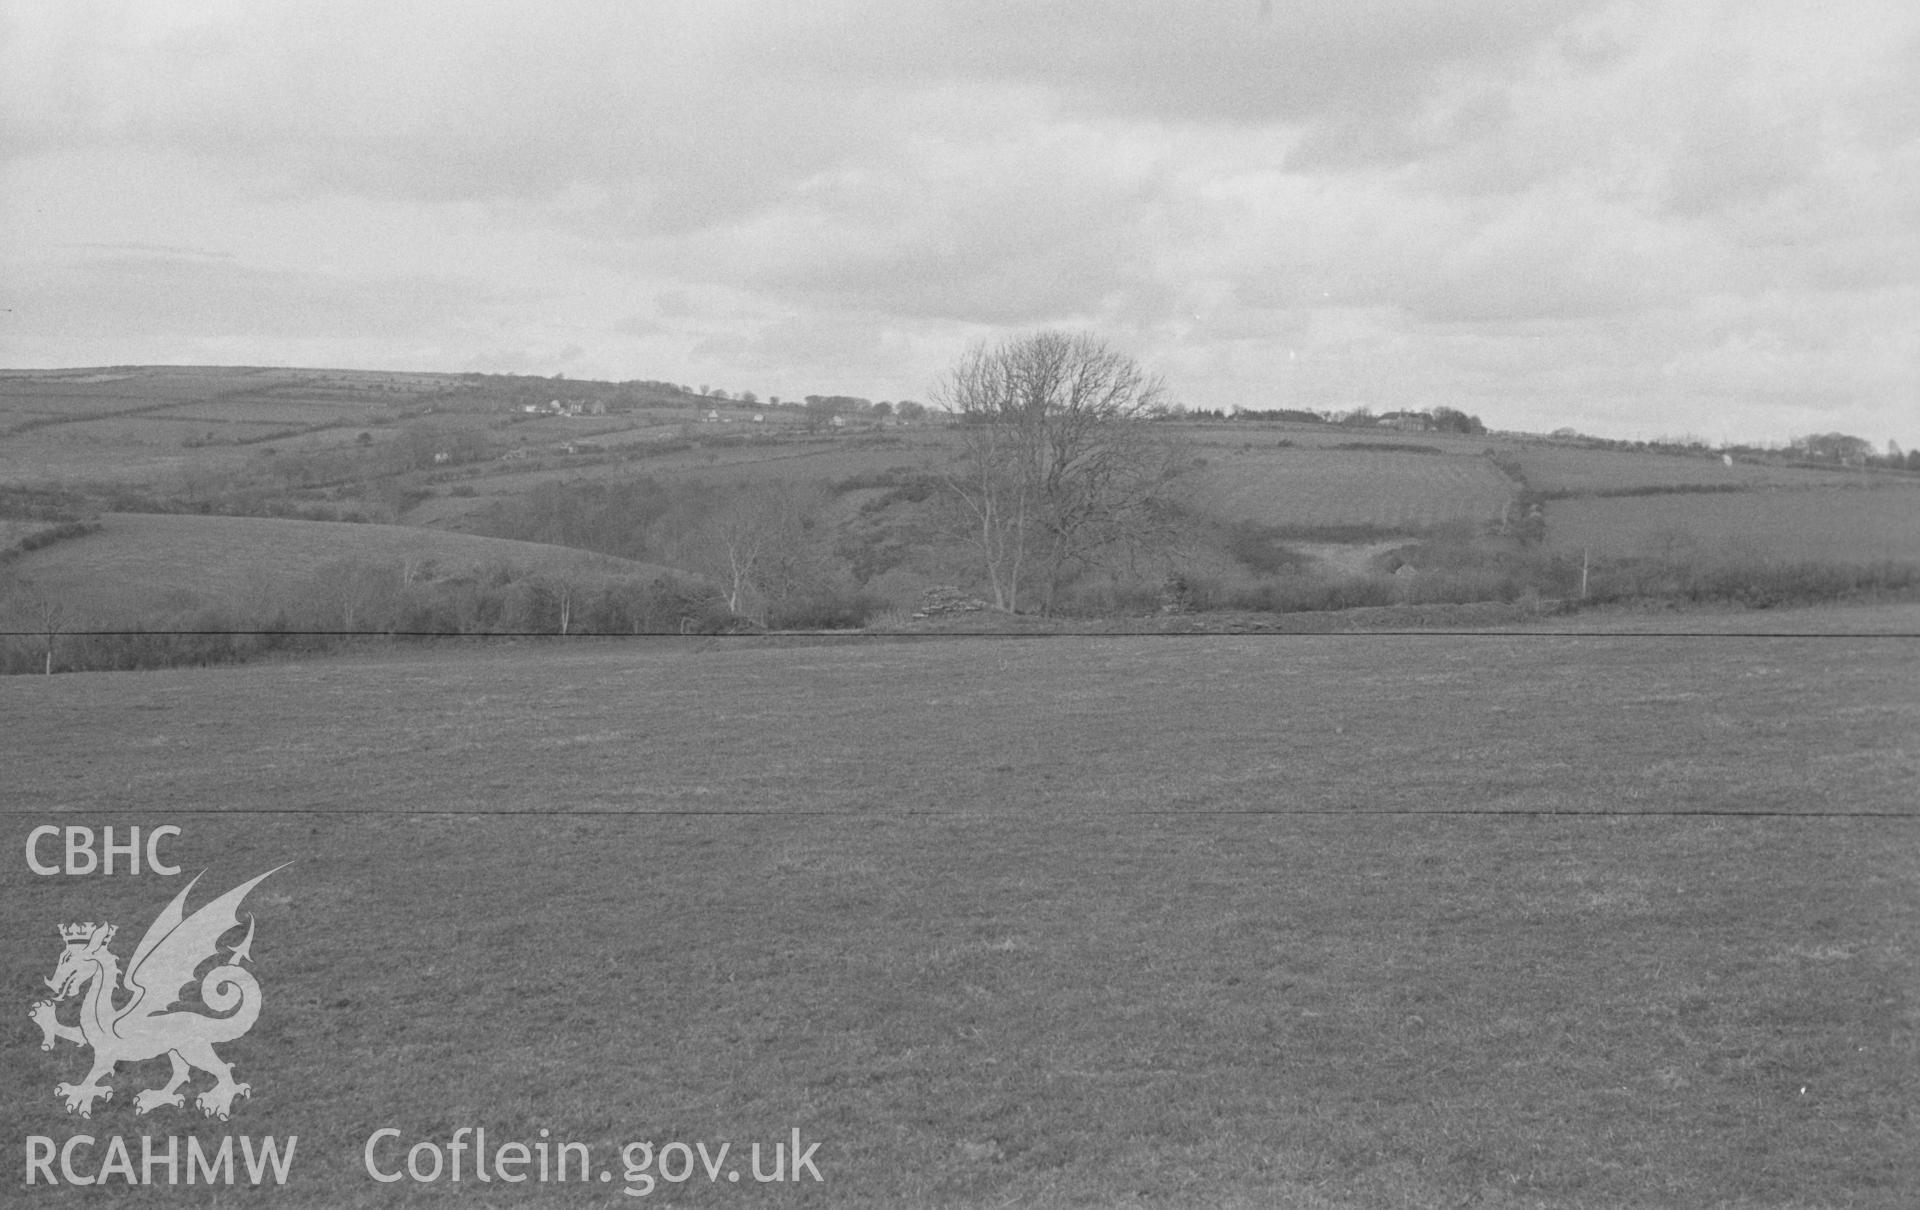 Digital copy of a black and white negative showing the Norman motte 100m north east of the site of St Mary's church, Llanfair Trefhelygen. Photographed in April 1963 by Arthur O. Chater from Grid Reference SN 3438 4425, looking south south east.